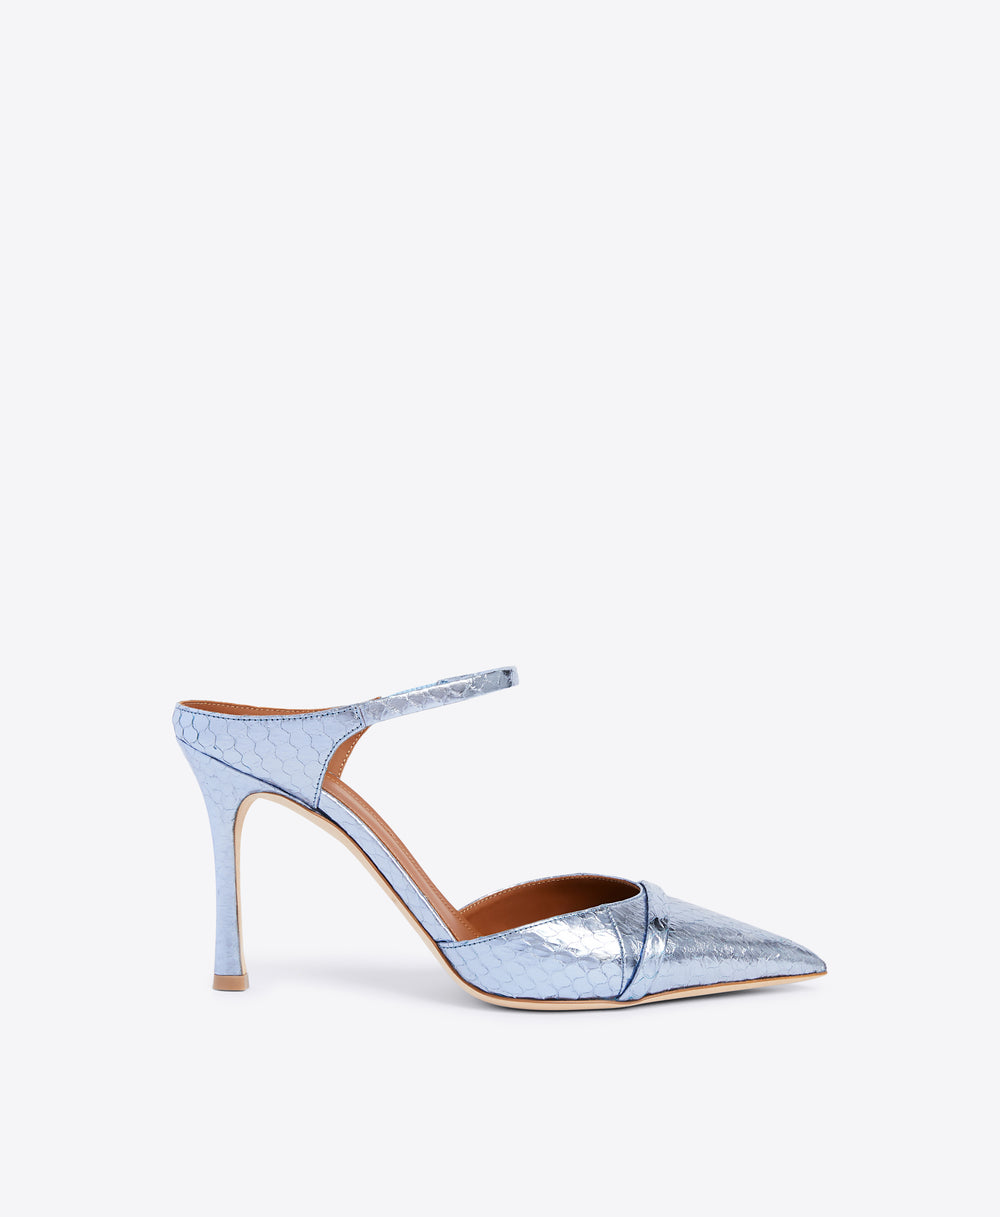 Double Strap Mules in Steel Blue - Pointed Toe on Flared Stiletto | Malone Souliers